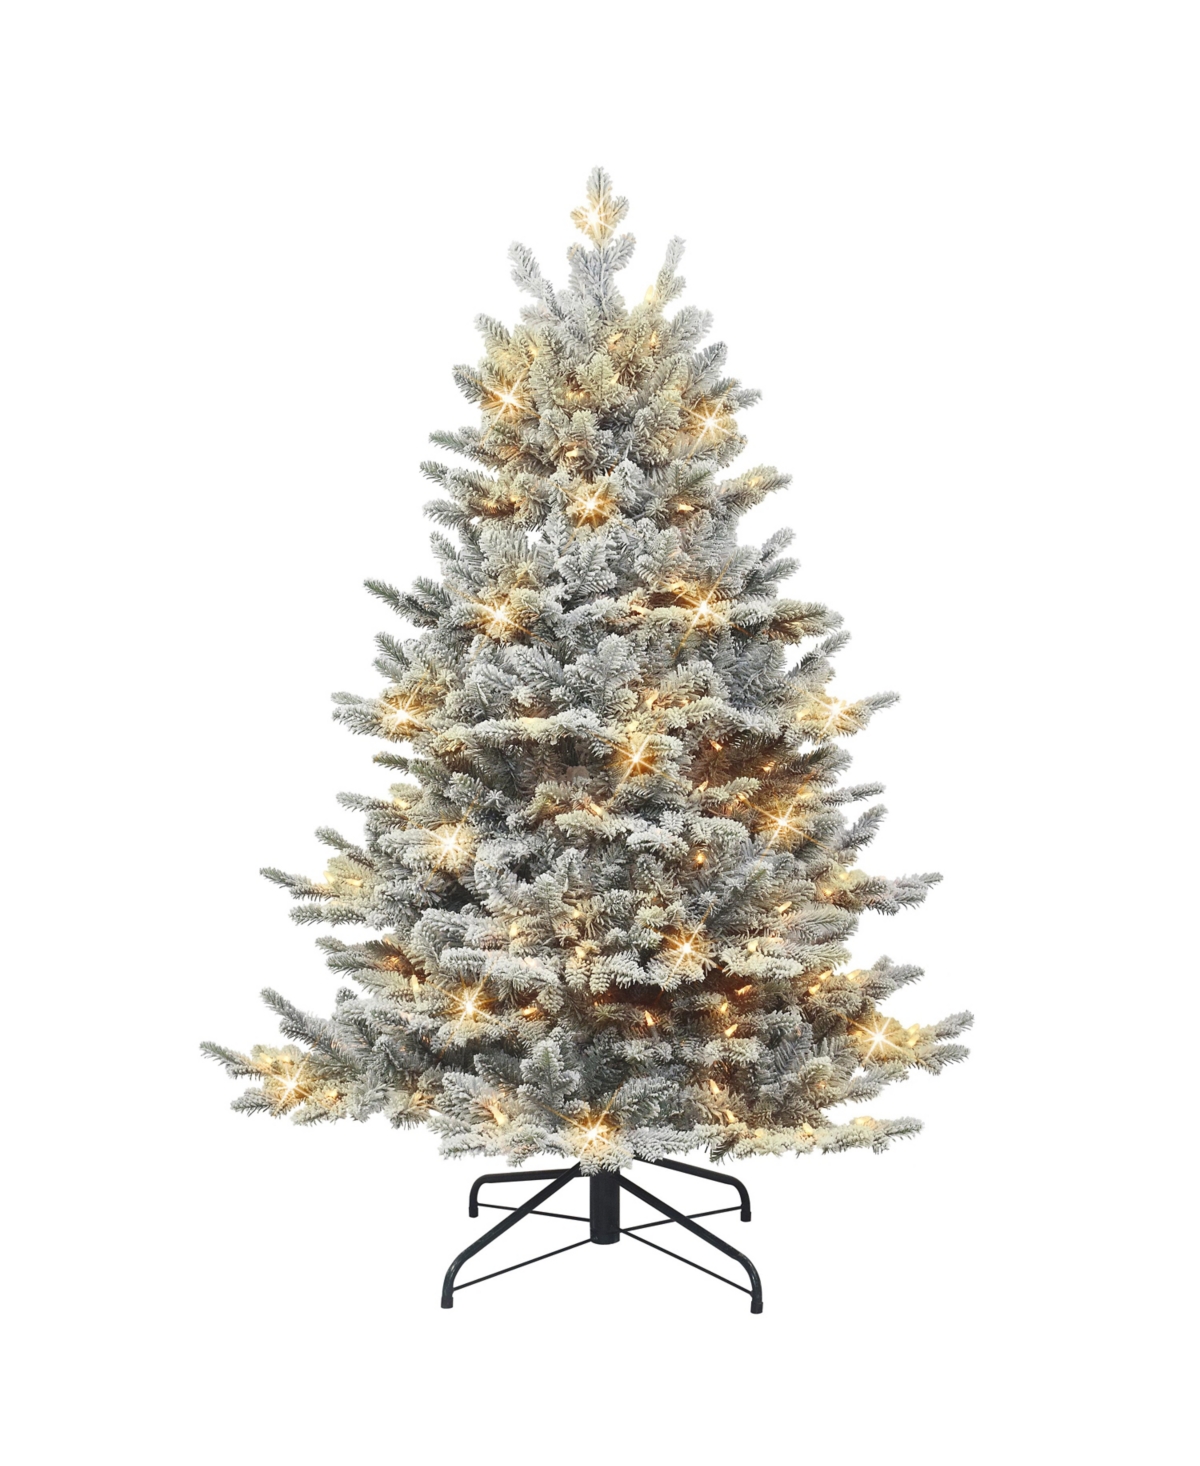 Puleo 4.5' Pre-lit Flocked Royal Majestic Douglas Fir Downswept Tree With 250 Underwriters Laboratories Cl In Green